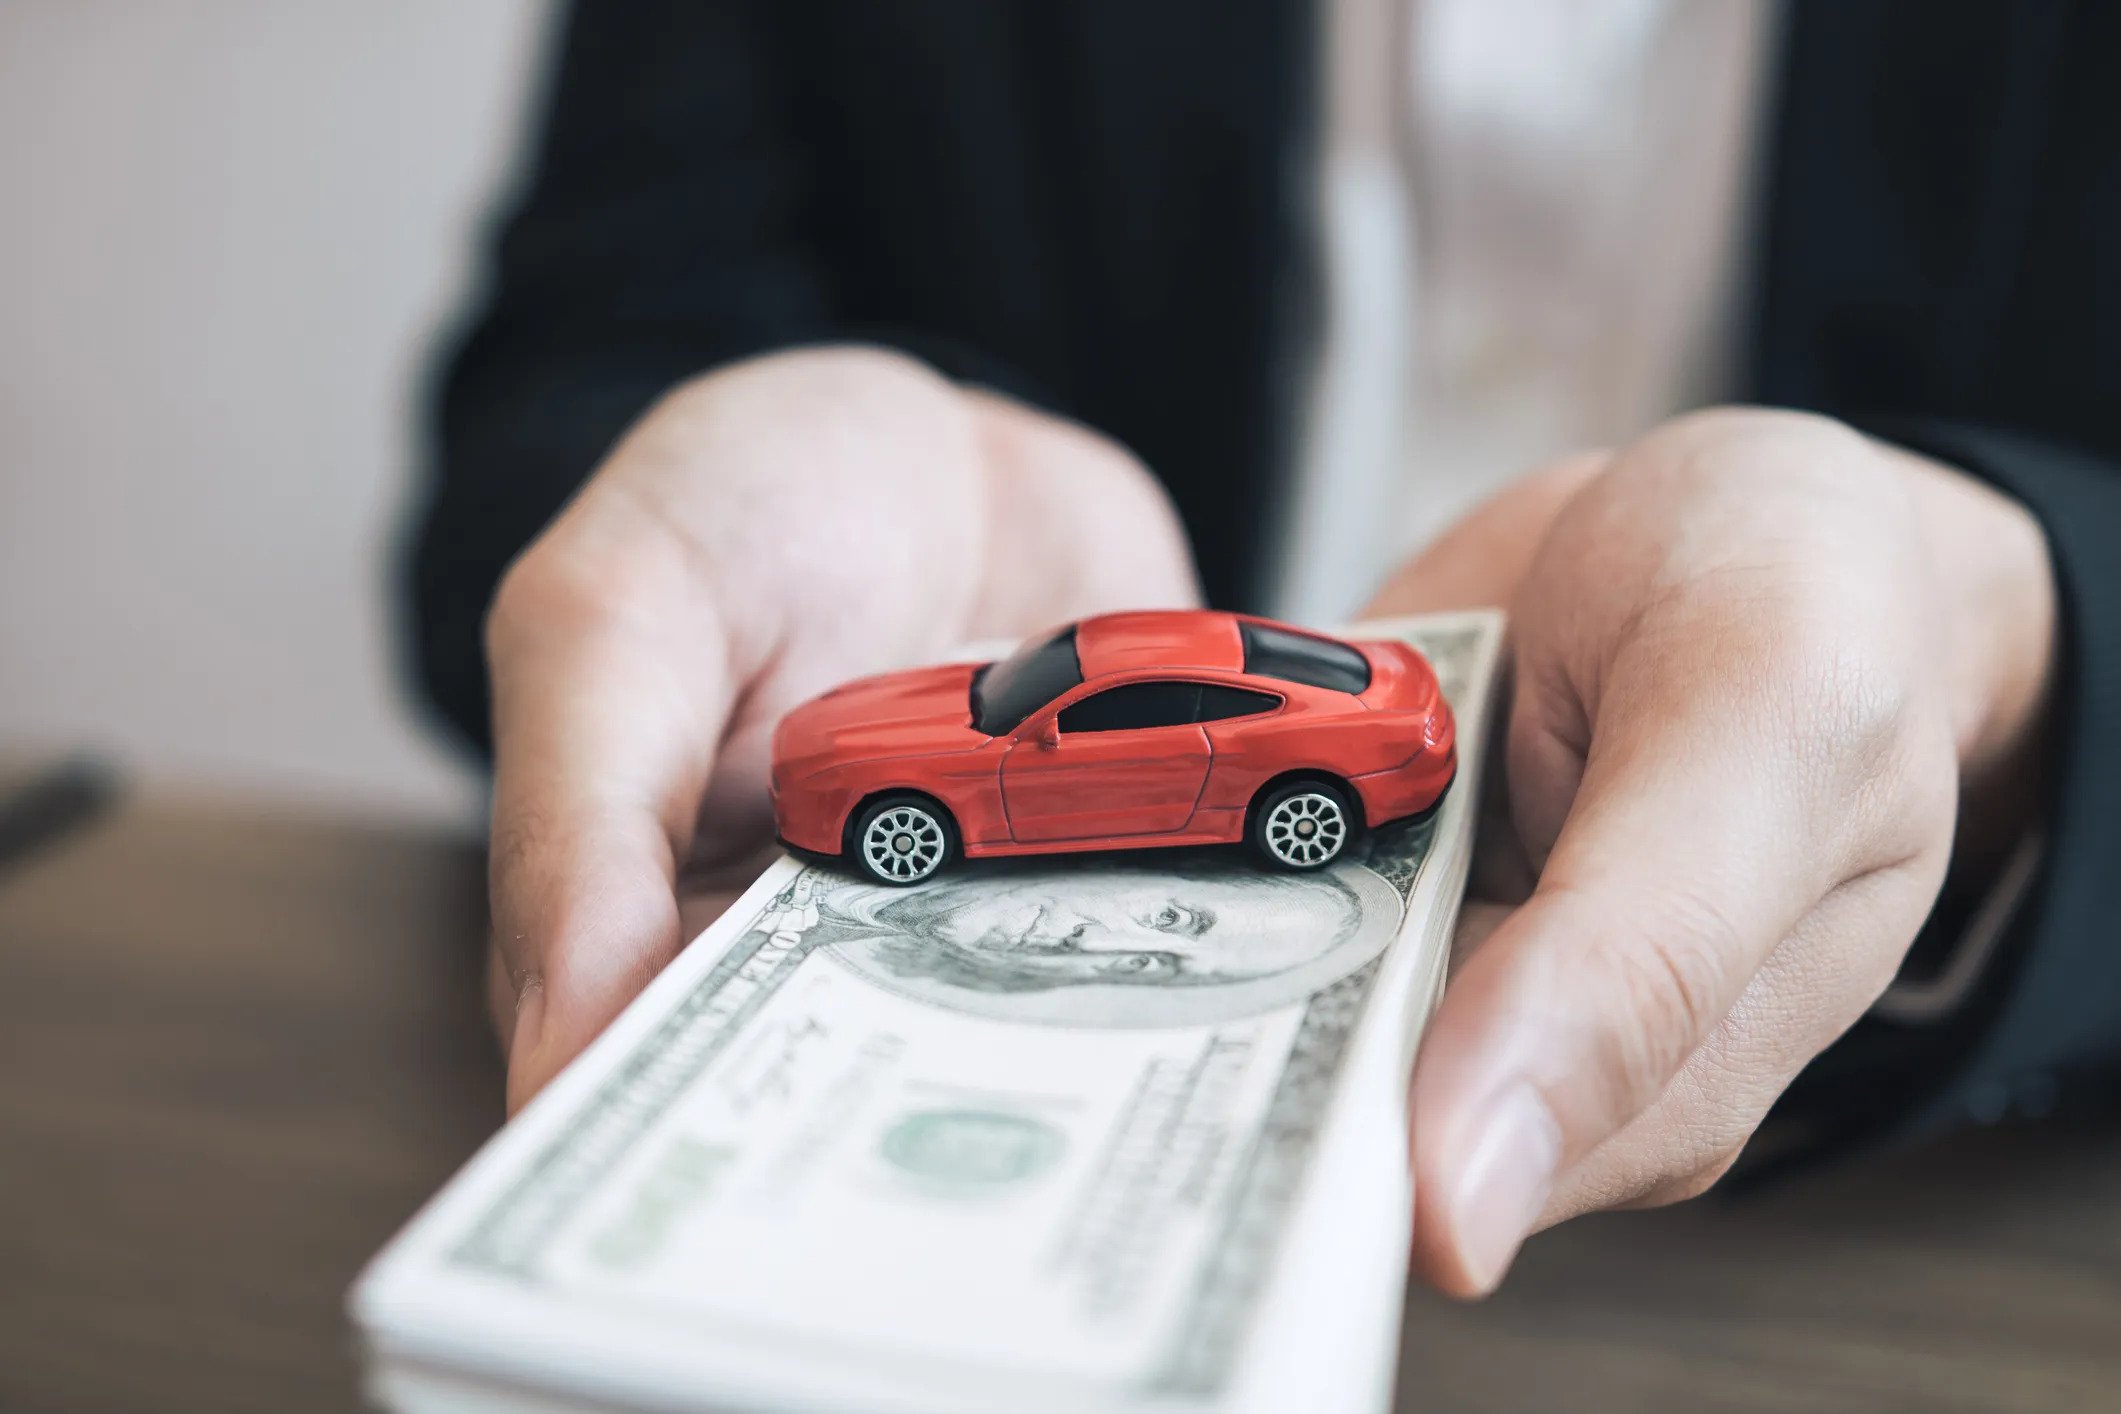 A lady holding a bundle of dollars and a red toy car